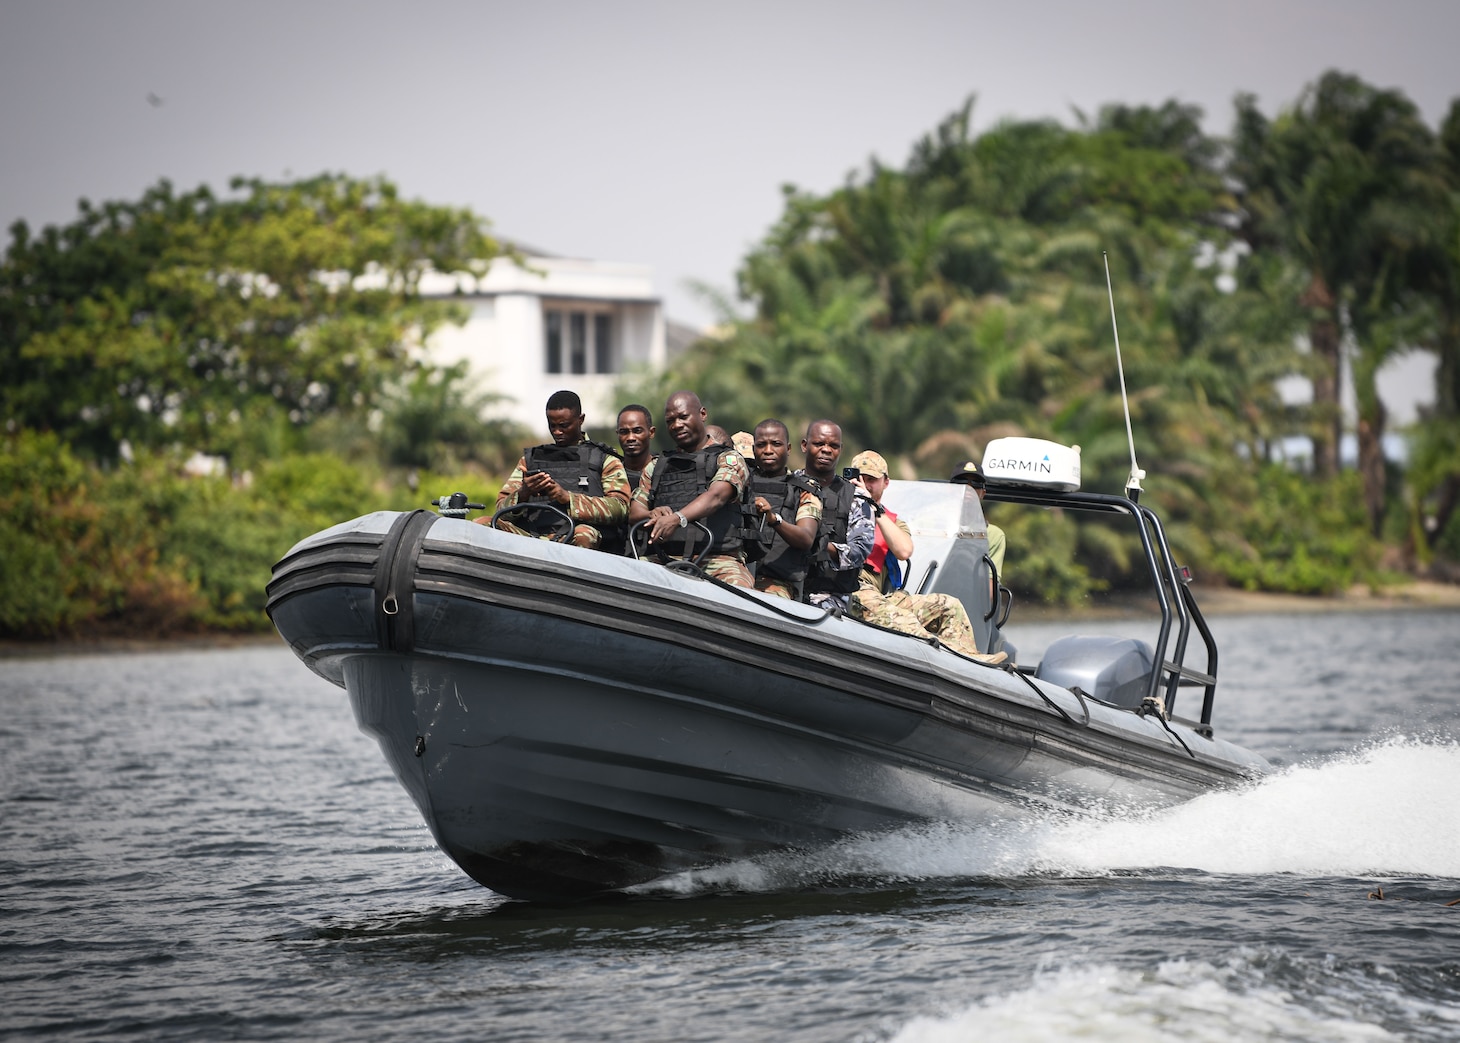 230125-N-DK722-1003 (Jan. 25, 2023) LAGOS, Nigeria – Benin Navy and Police Force personnel, alongside U.S. Coast Guard personnel from Law Enforcement Detachment 403, conduct Visit, Board, Search and Seizure training during Obangame Express 2023, in Lagos, Nigeria, Jan. 25, 2023. Obangame Express 2023, conducted by U.S. Naval Forces Africa, is a maritime exercise designed to improve cooperation, and increase maritime safety and security among participating nations in the Gulf of Guinea and Southern Atlantic Ocean. U.S. Sixth Fleet, headquartered in Naples, Italy, conducts the full spectrum of joint and naval operations, often in concert with allied and interagency partners, in order to advance U.S. national interests and security and stability in Europe and Africa. (U.S. Navy photo by Mass Communication Specialist 1st class Cameron C. Edy)